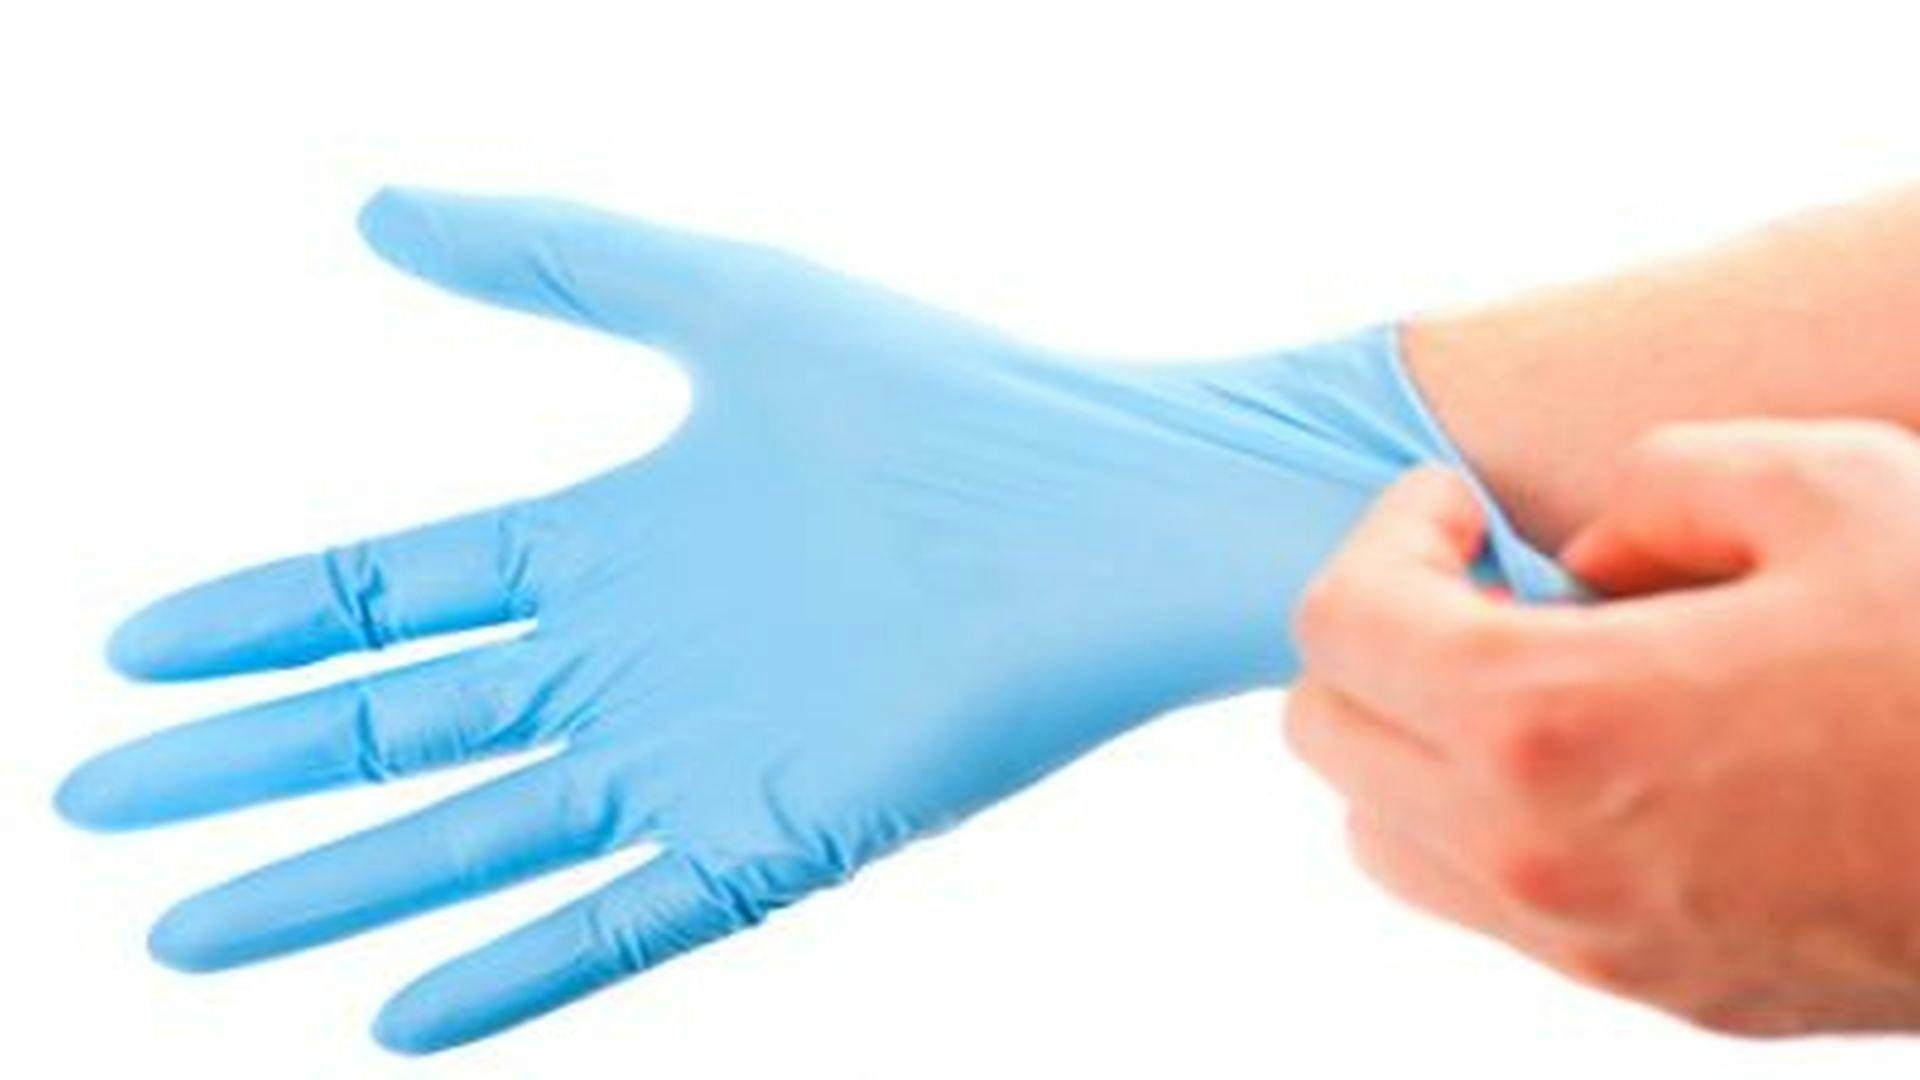 Researchers Study Effect of PHMB-Treated Gloves on Pathogens From Contact Surfaces